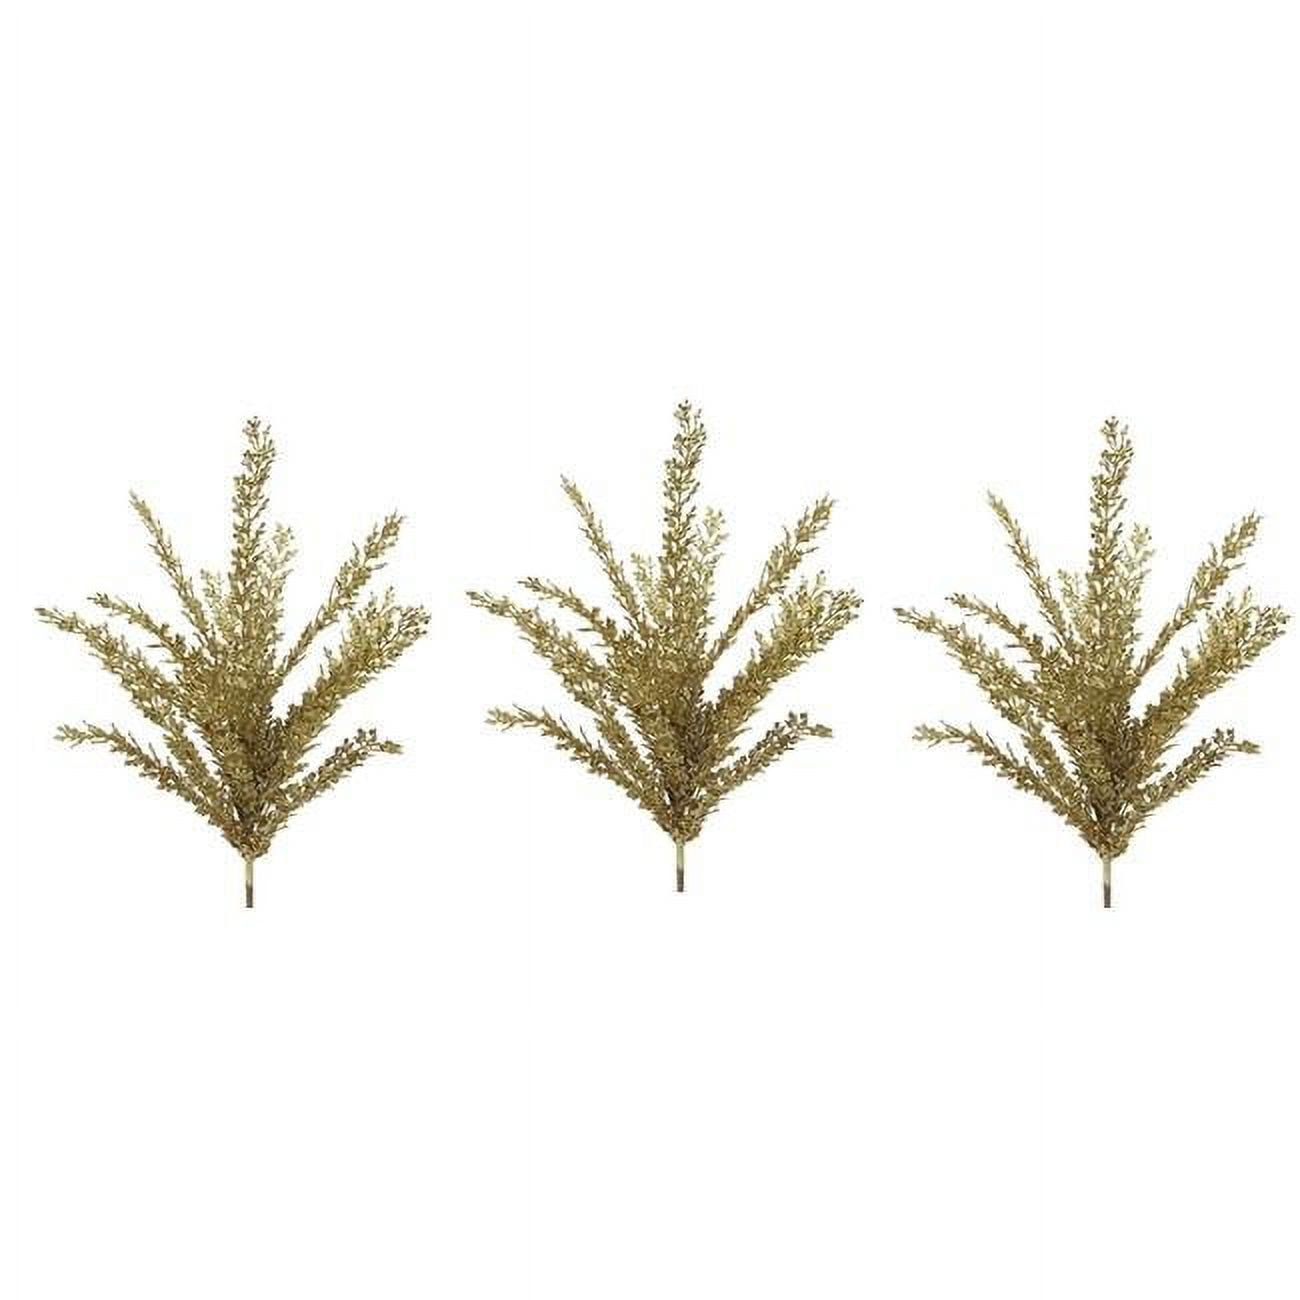 Picture of Admired by Nature GXL7706-GOLD-3 23 in. Glitter Filigree Leaf Spray Christmas Decor, Gold - Set of 3